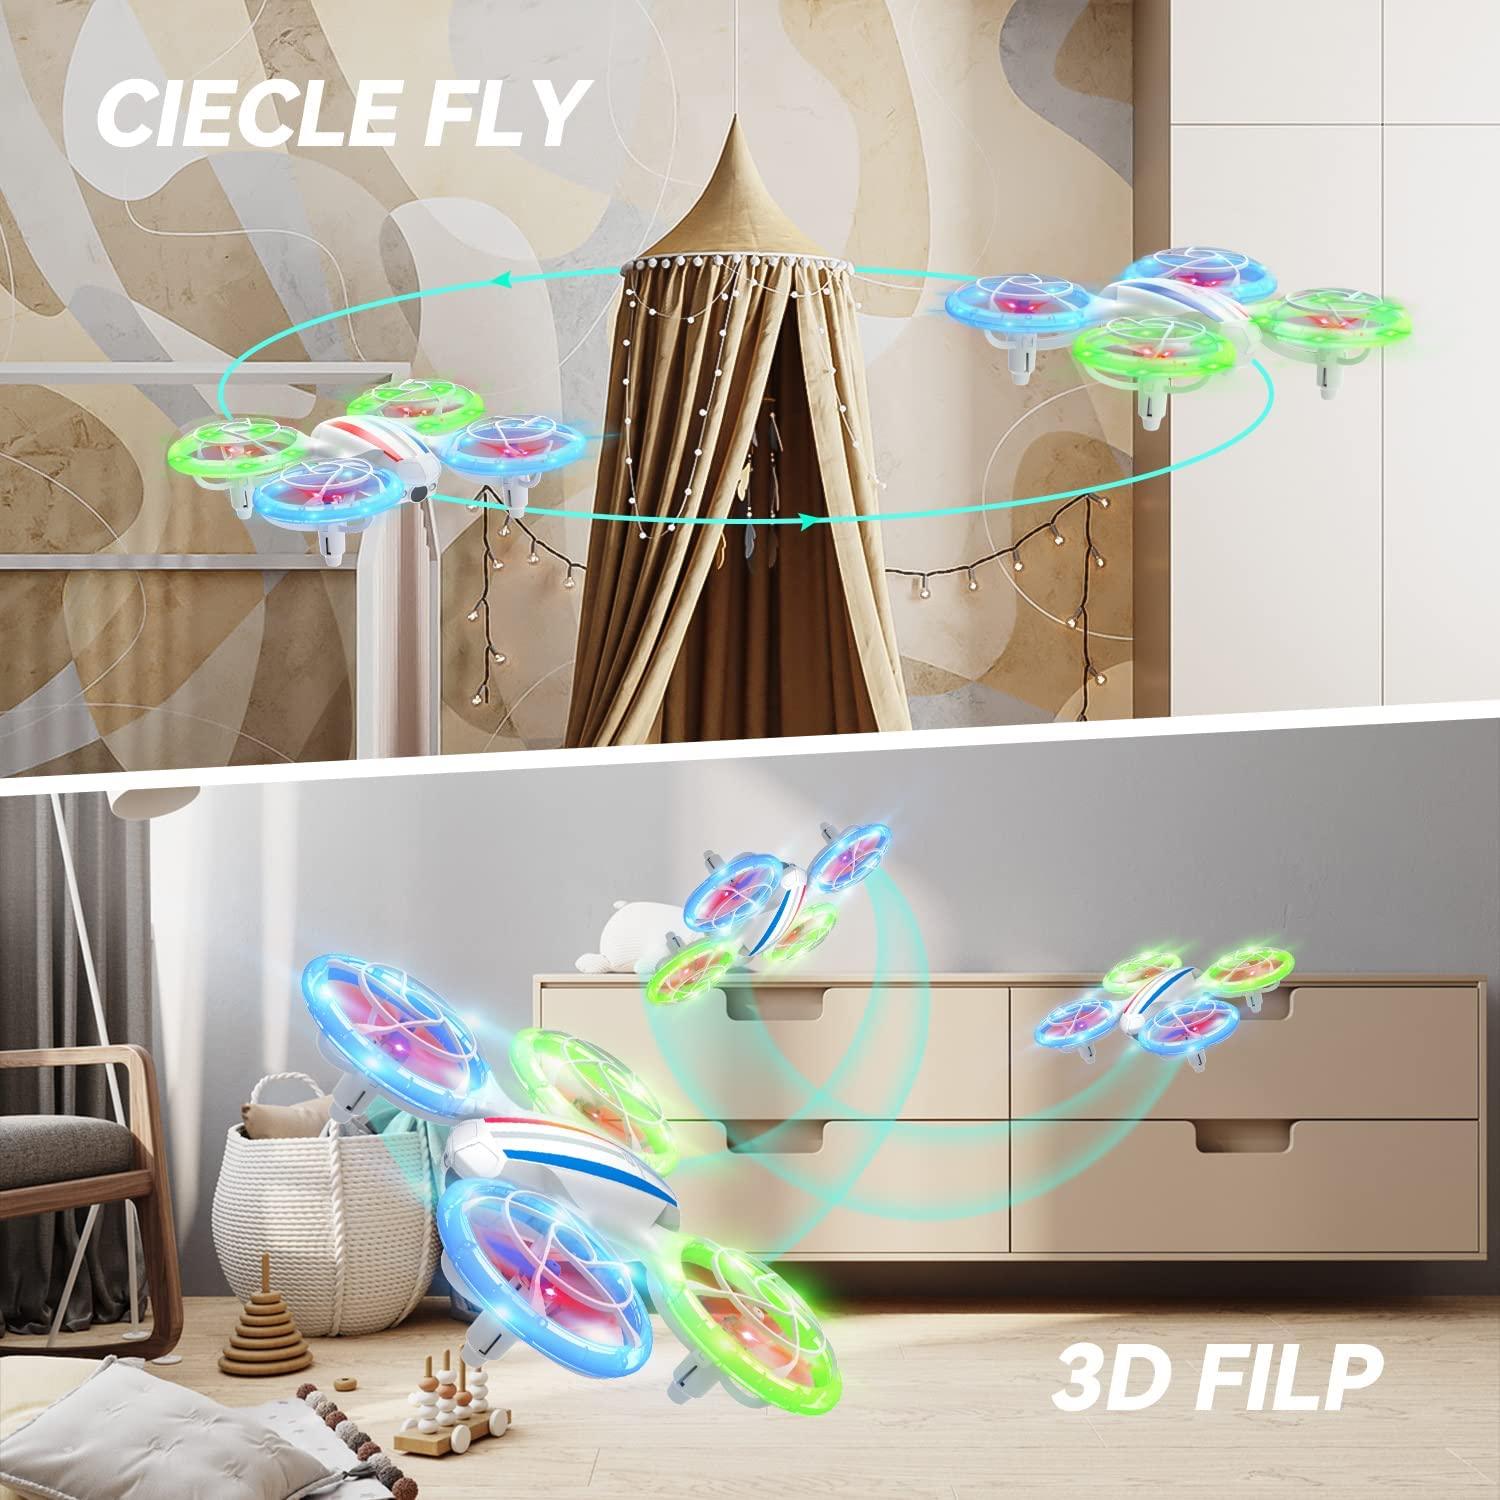 DEERC D23 Drone - for Kids Adults Beginners with 720P HD FPV WiFi Camera, LED Nano Hobby RC Quadcopter with Five Light Modes, Altitude Hold, Headless Mode, 3 Speed Modes, 360° Flip - RCDrone